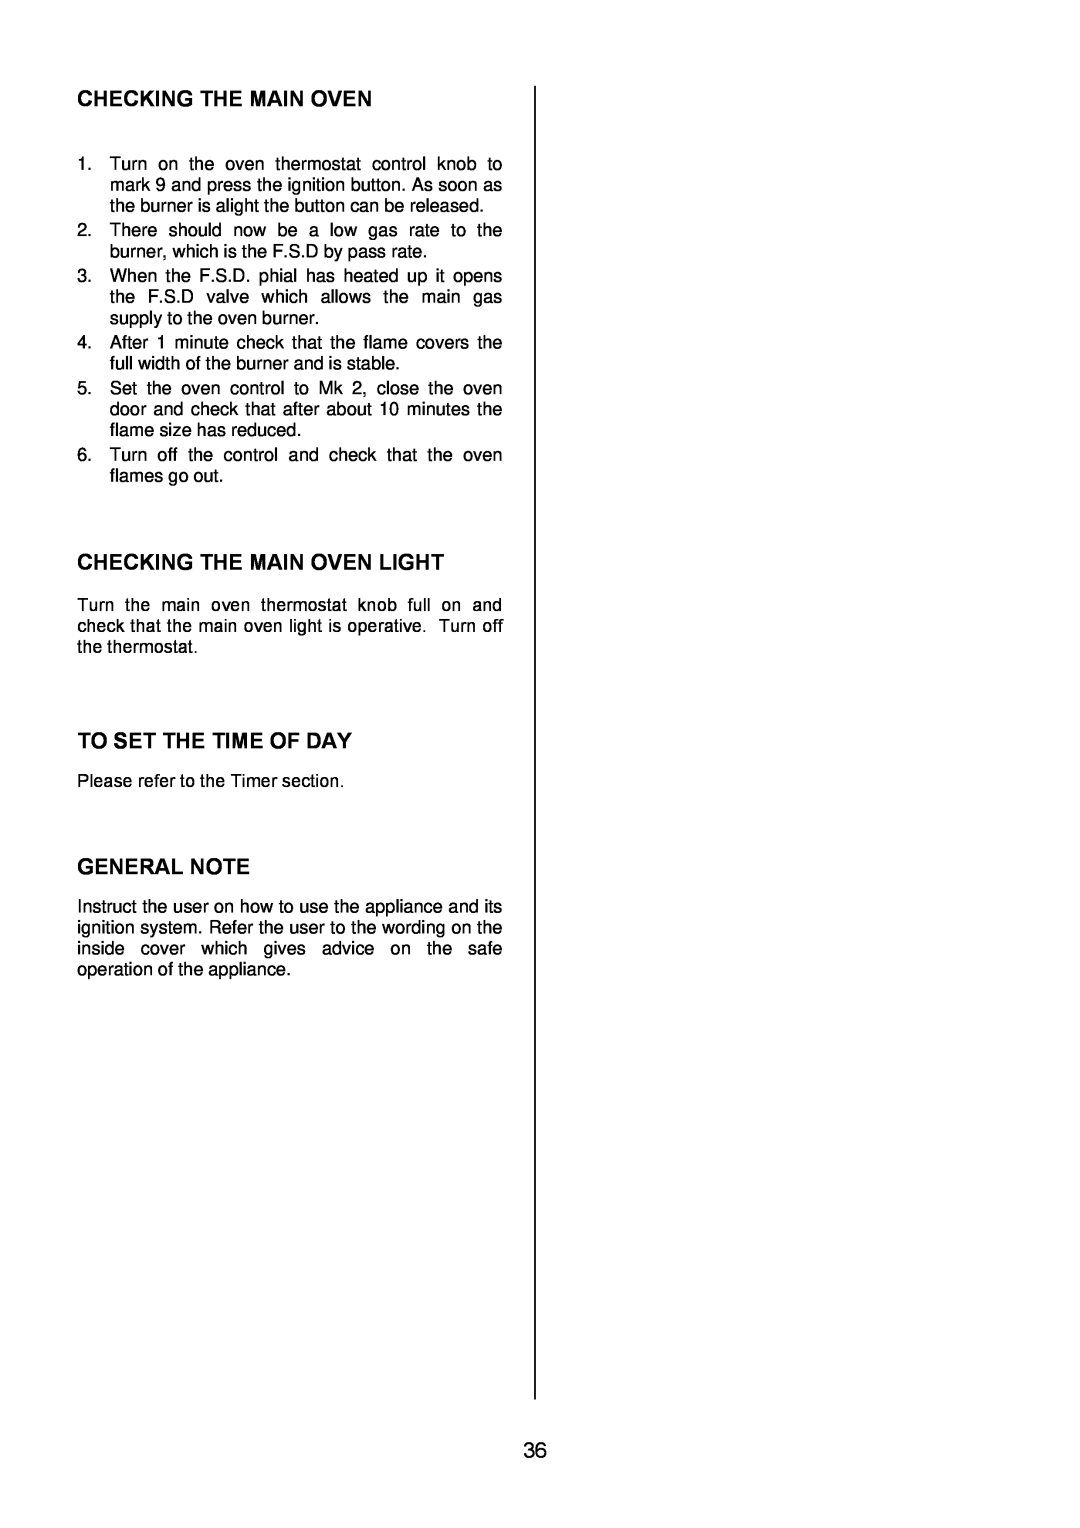 Electrolux EIKG6047, EIKG6046 user manual Checking The Main Oven Light, To Set The Time Of Day, General Note 